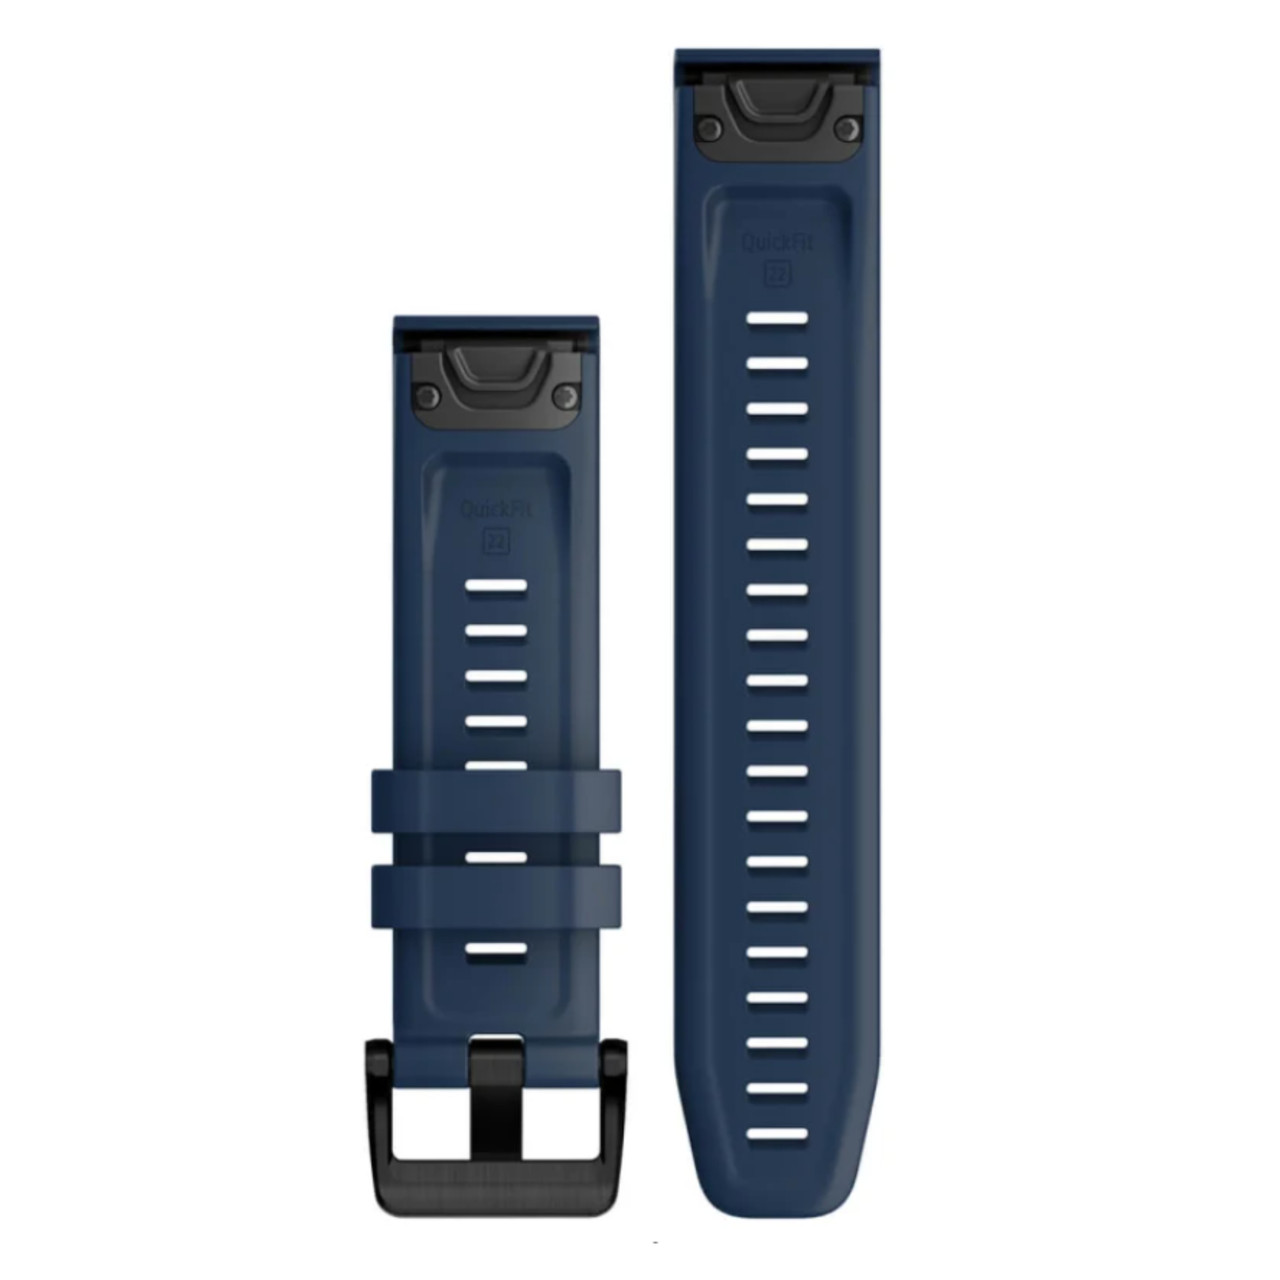 Garmin New OEM QuickFit® 22 Watch Bands Captain Blue with Black Stainless Steel Hardware, 010-13111-31